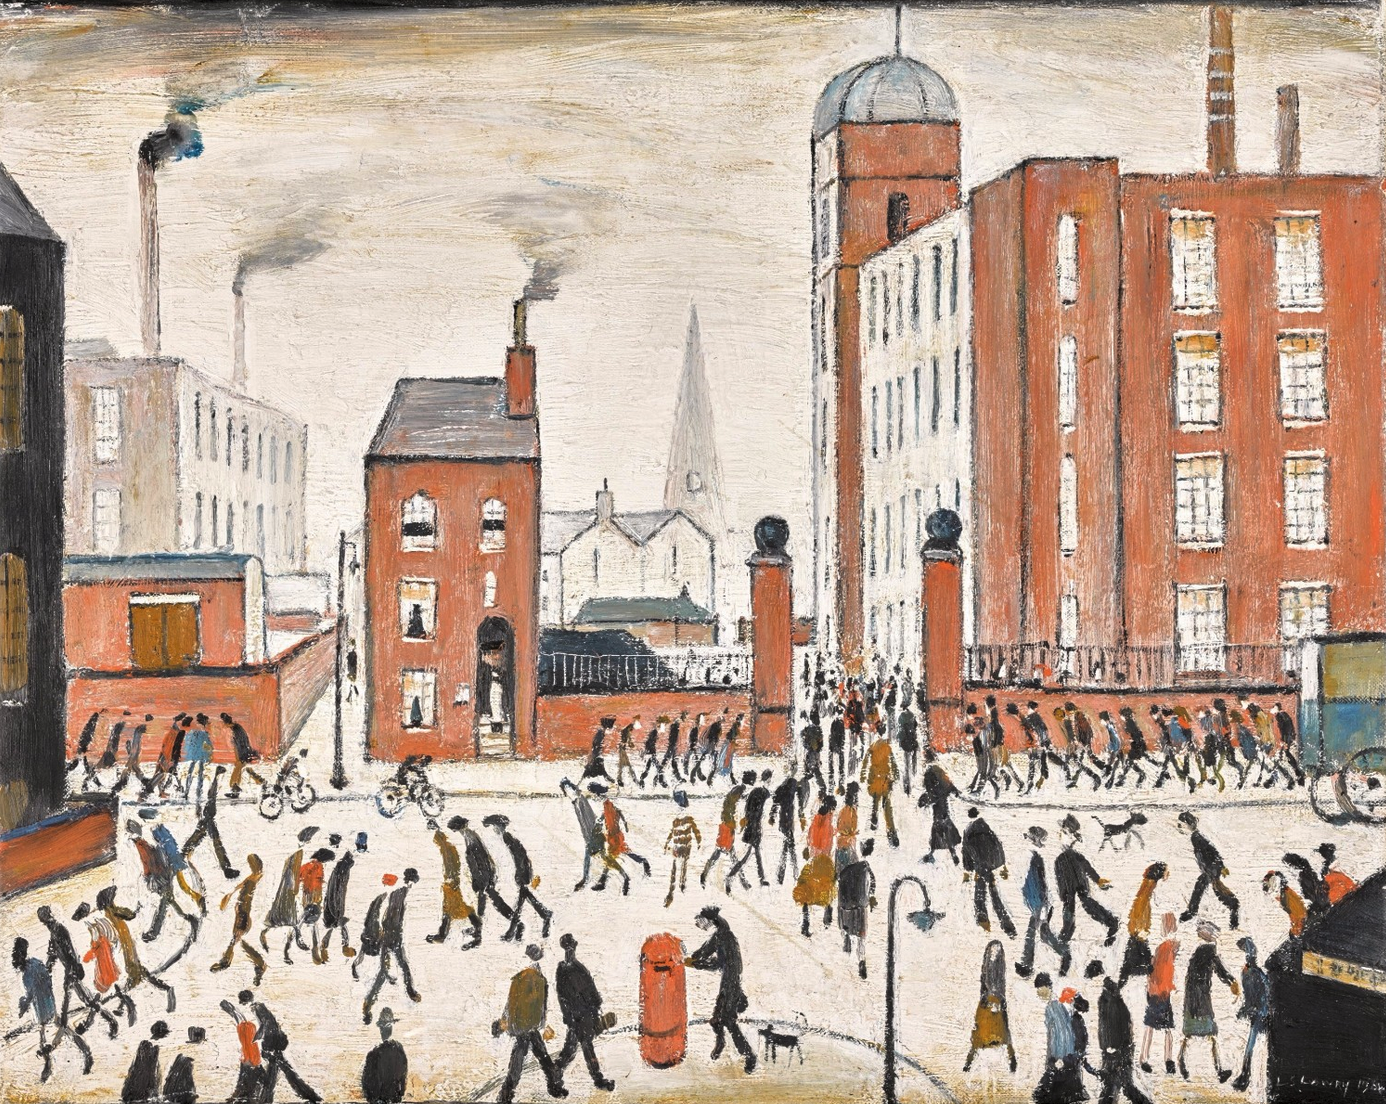 The Rush Hour (1964) by Laurence Stephen Lowry (1887 - 1976), English artist.